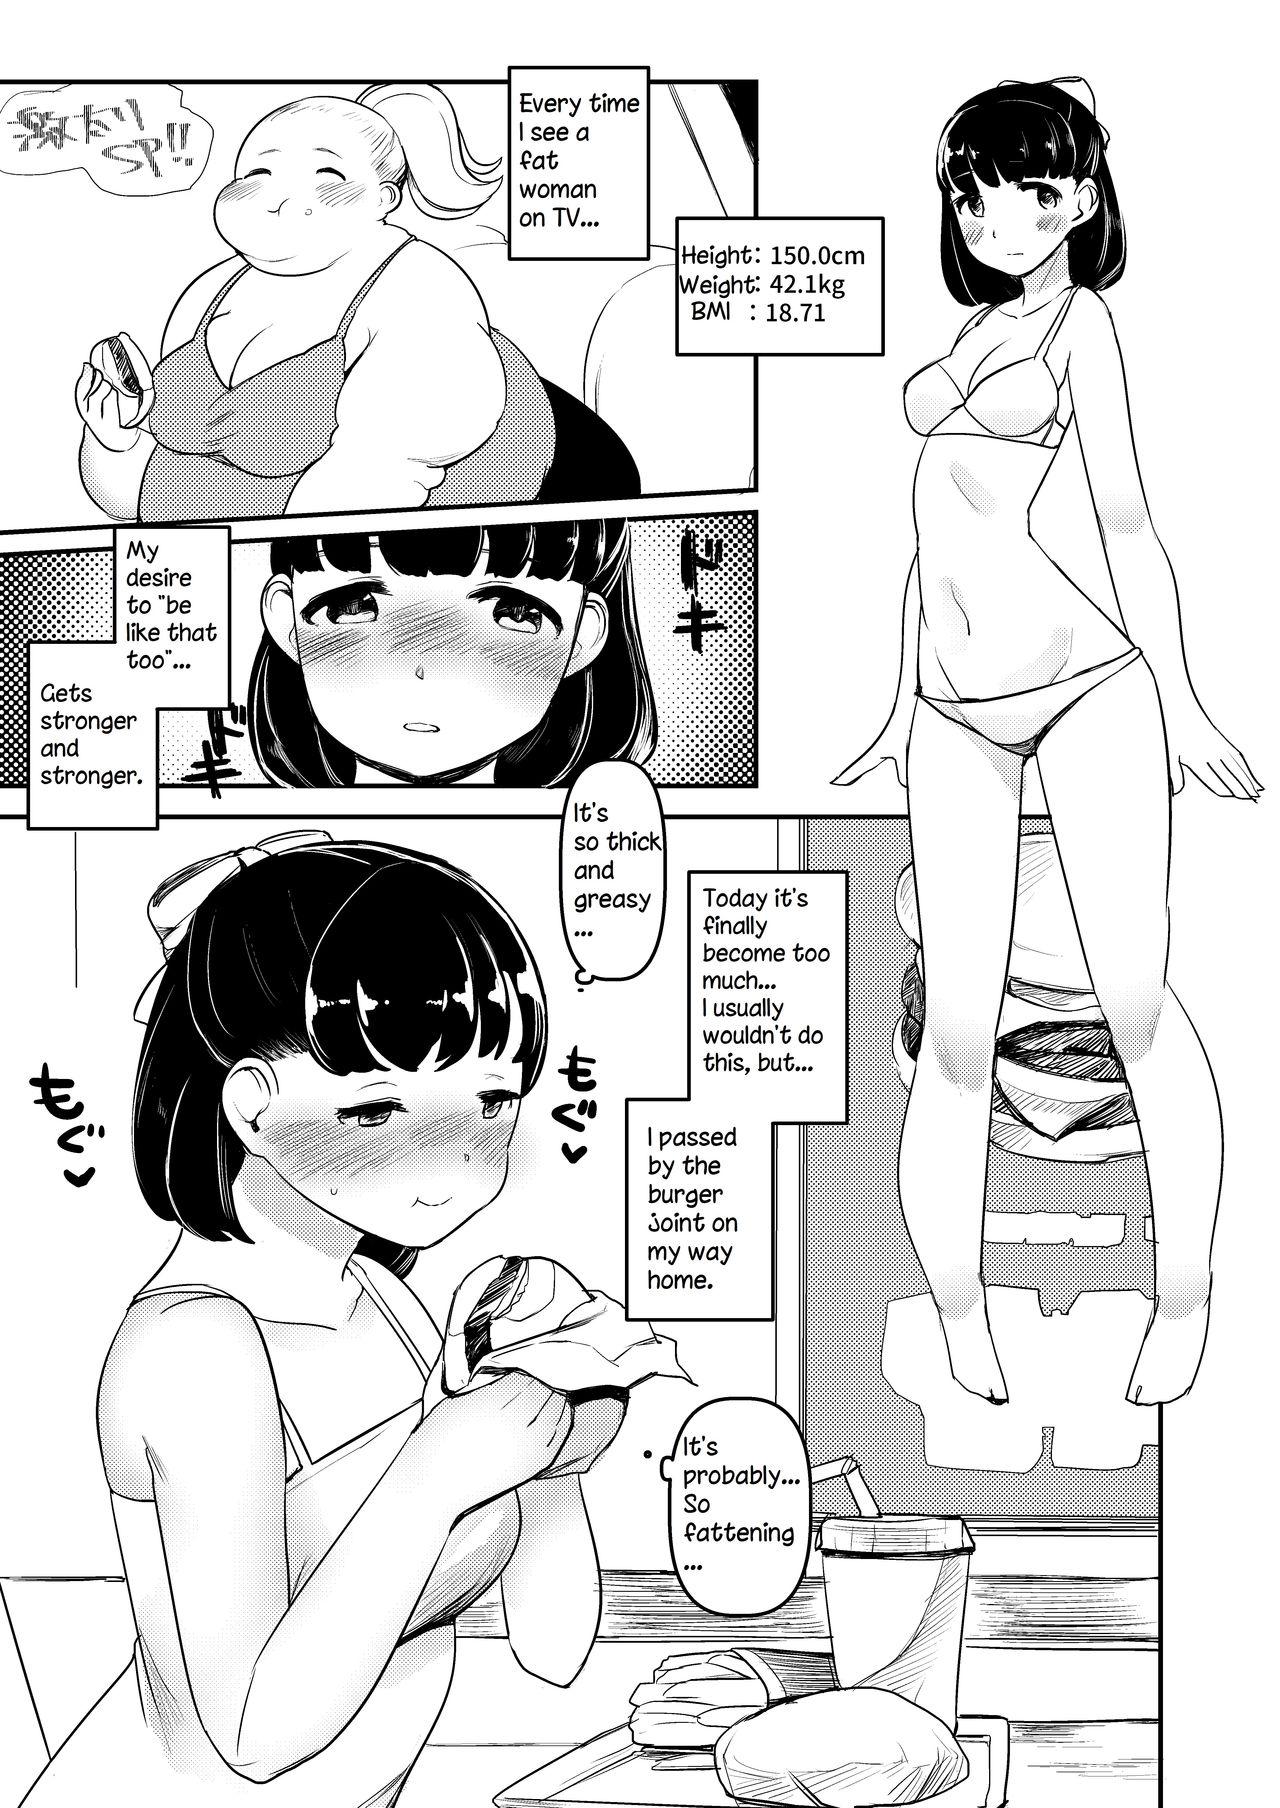 Virtual Ayano's Weight Gain Diary Tits - Page 1